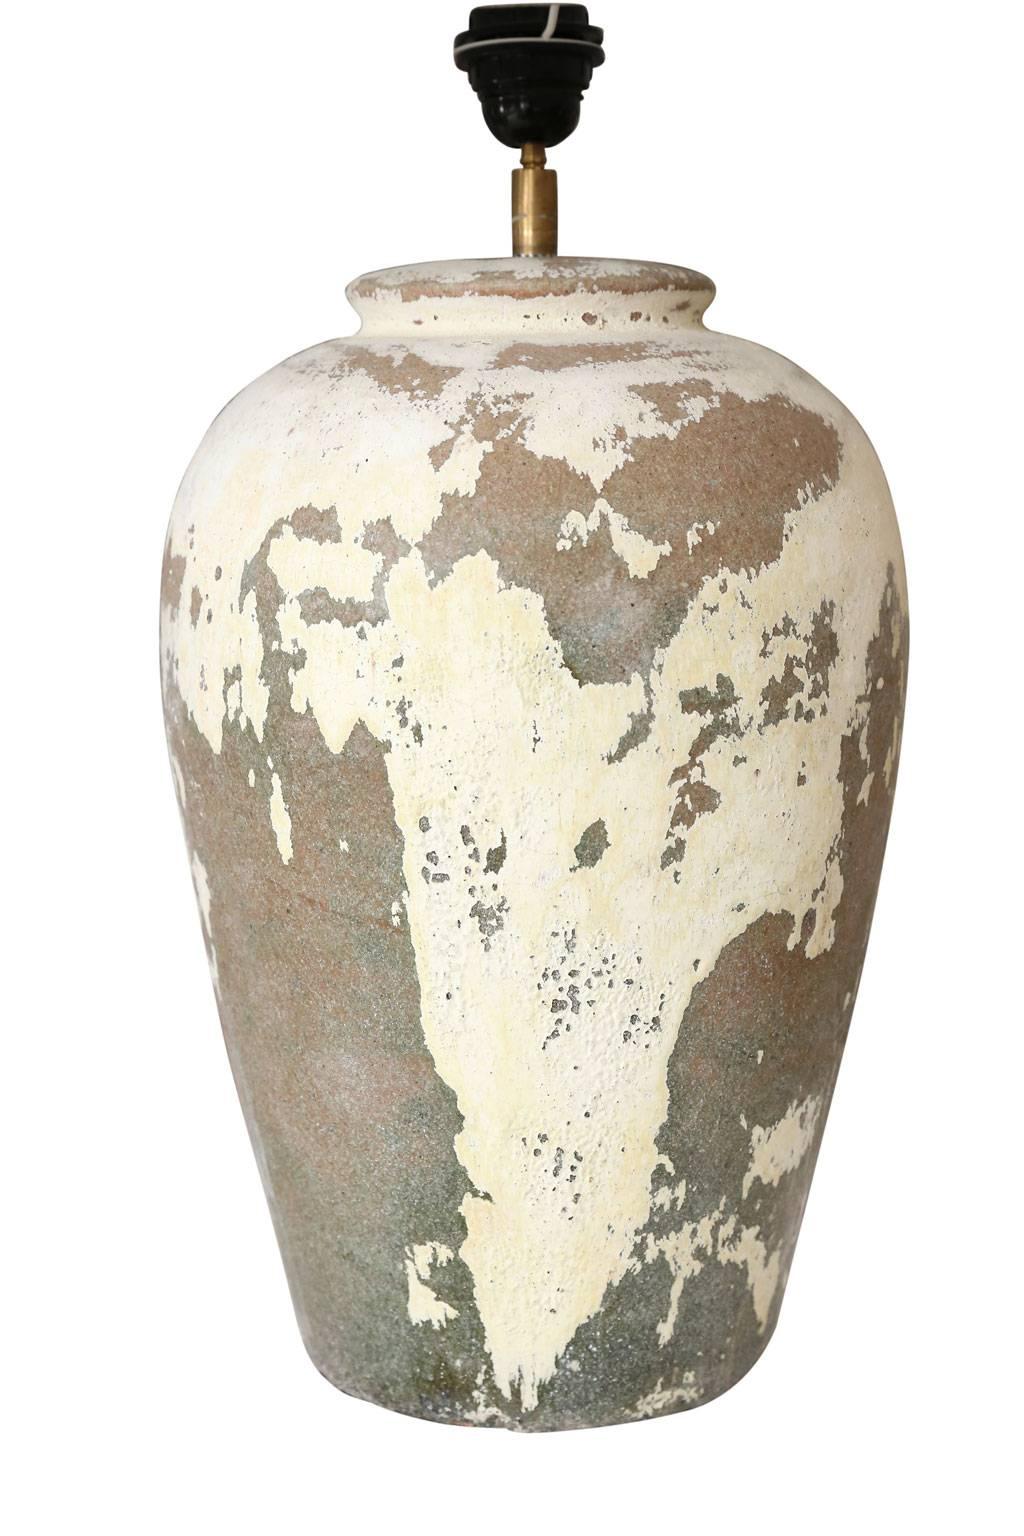 Pair of ceramic grayish terracotta color vases with remnants of an off-white plaster finish, newly wired to as custom table lamps. Each lamp comes with a complementary rolled-edge linen shade (measurements include shade), and both lamps are sold